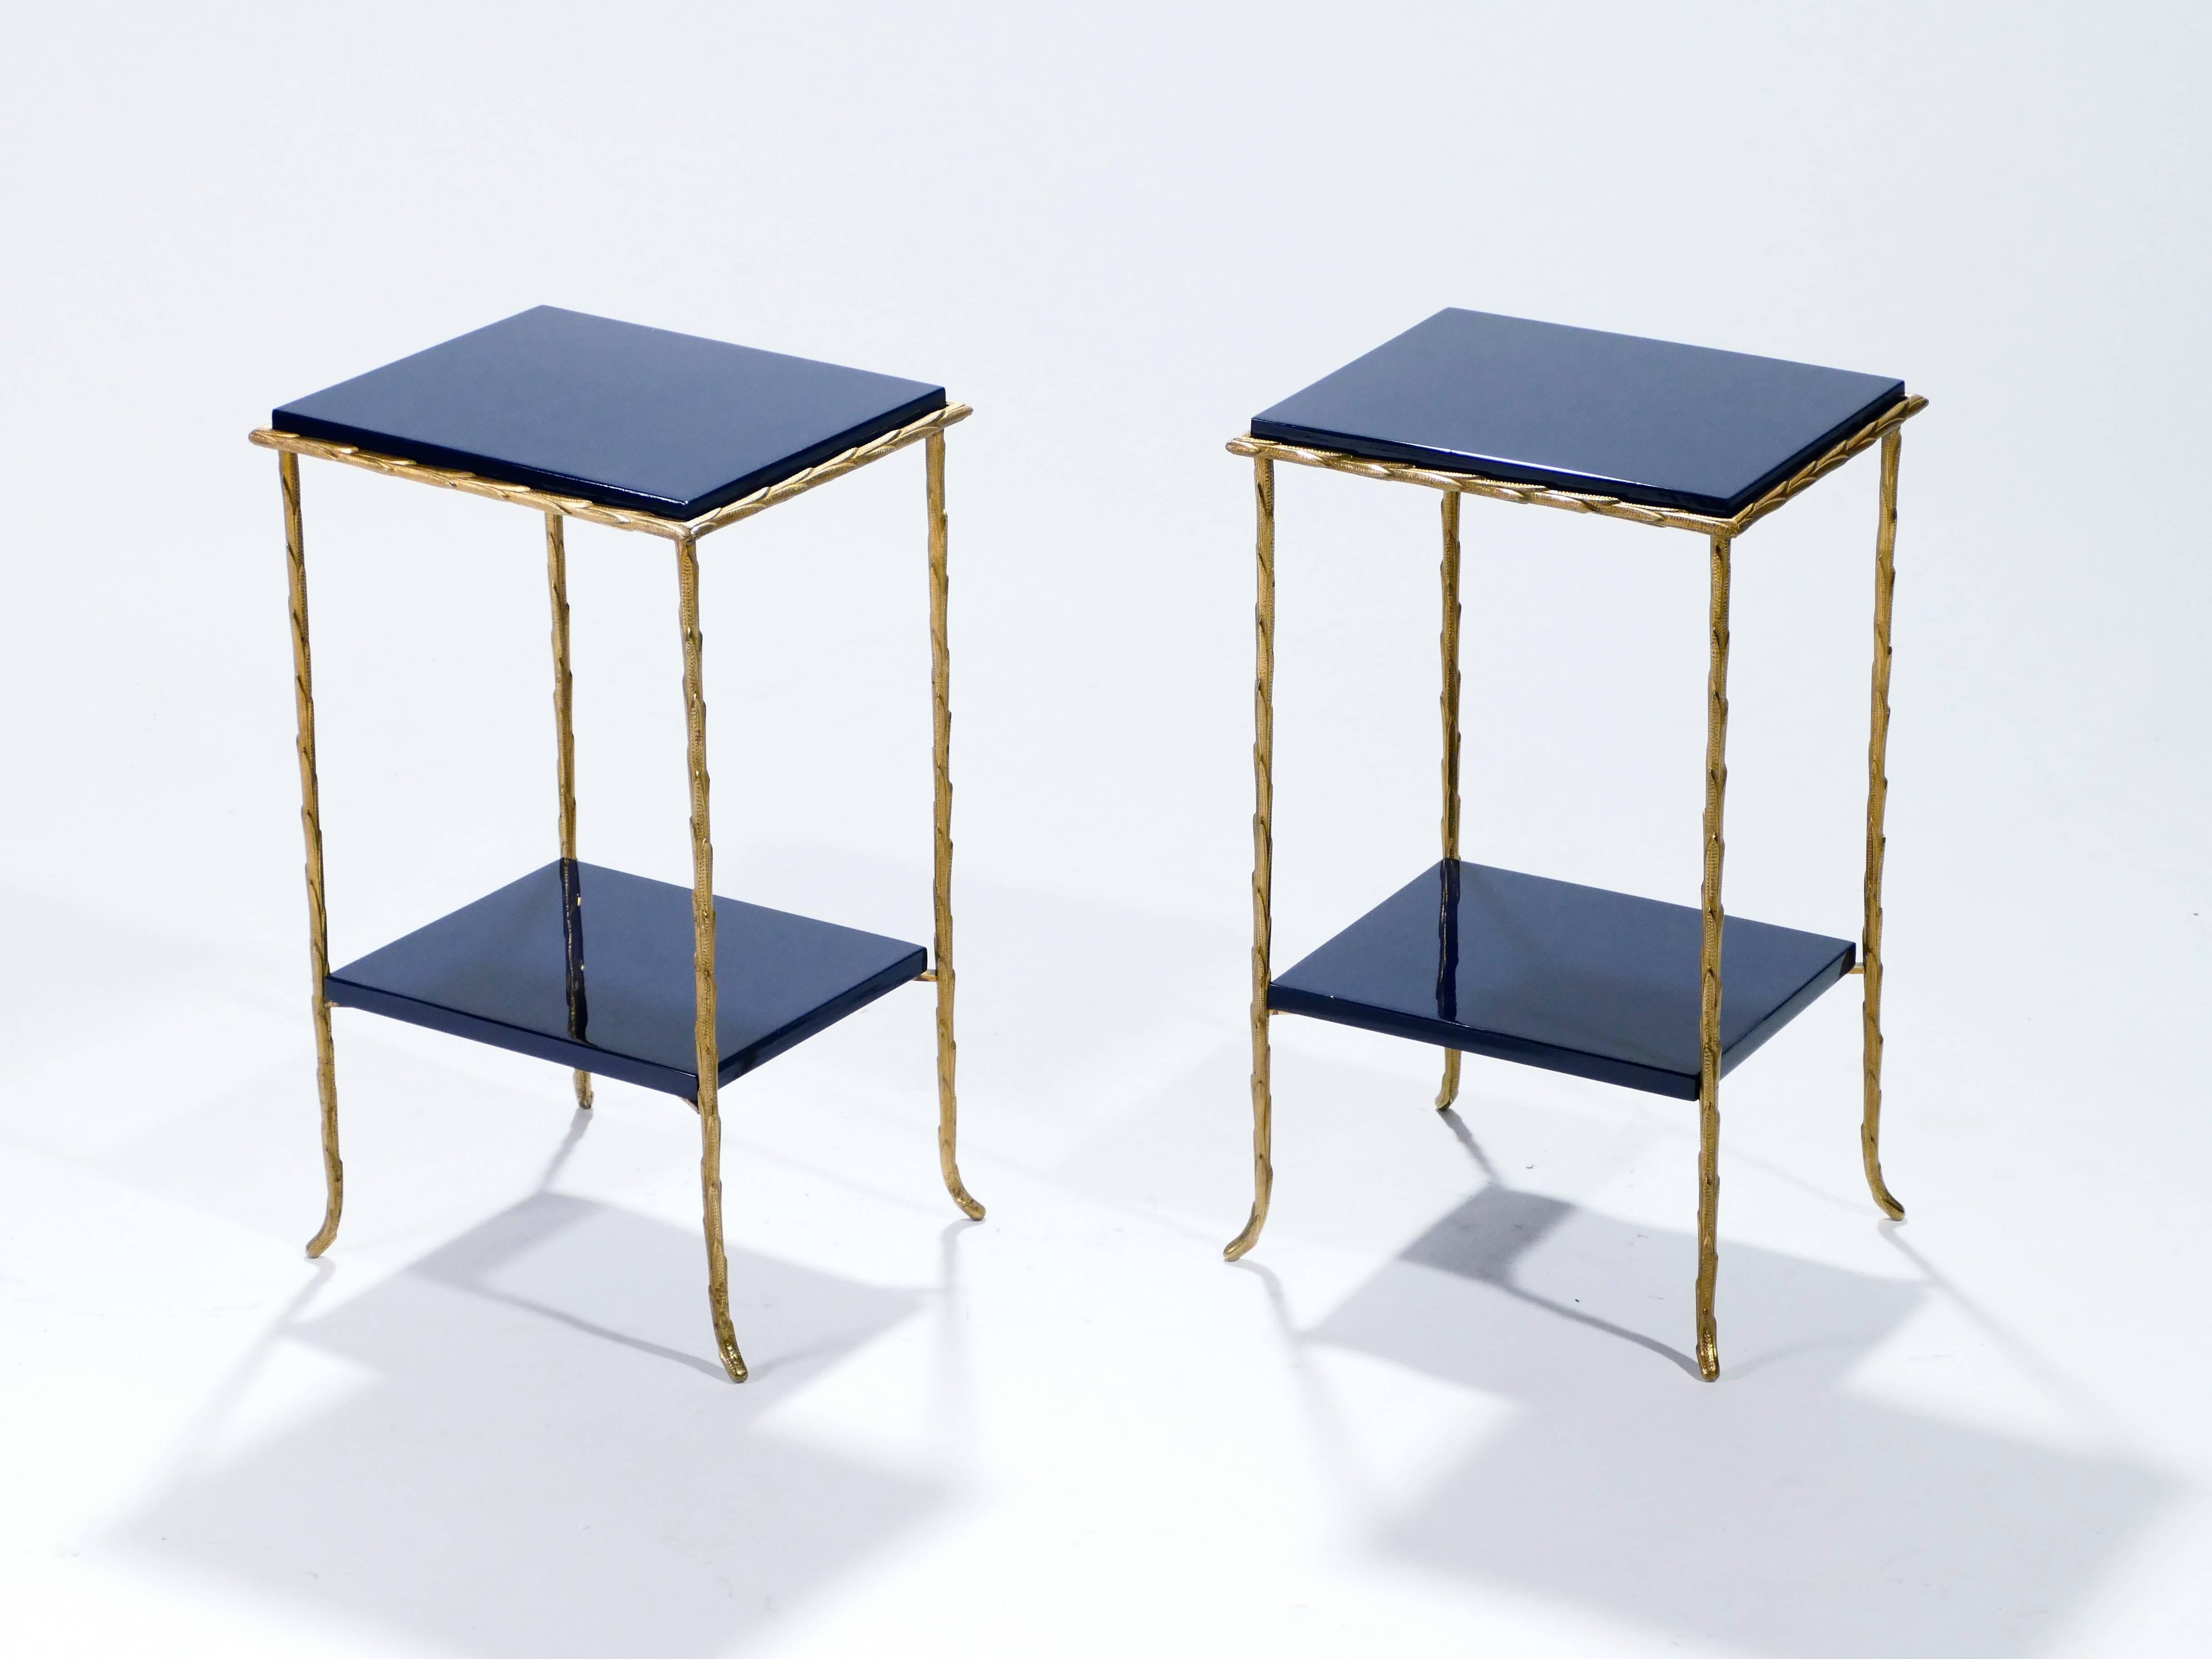 Maison Bagués, a design firm that began in the heart of Paris during the late 19th century, quickly established itself as a designer and producer of excellent-quality lighting and furniture. These side tables embody the level of quality material and